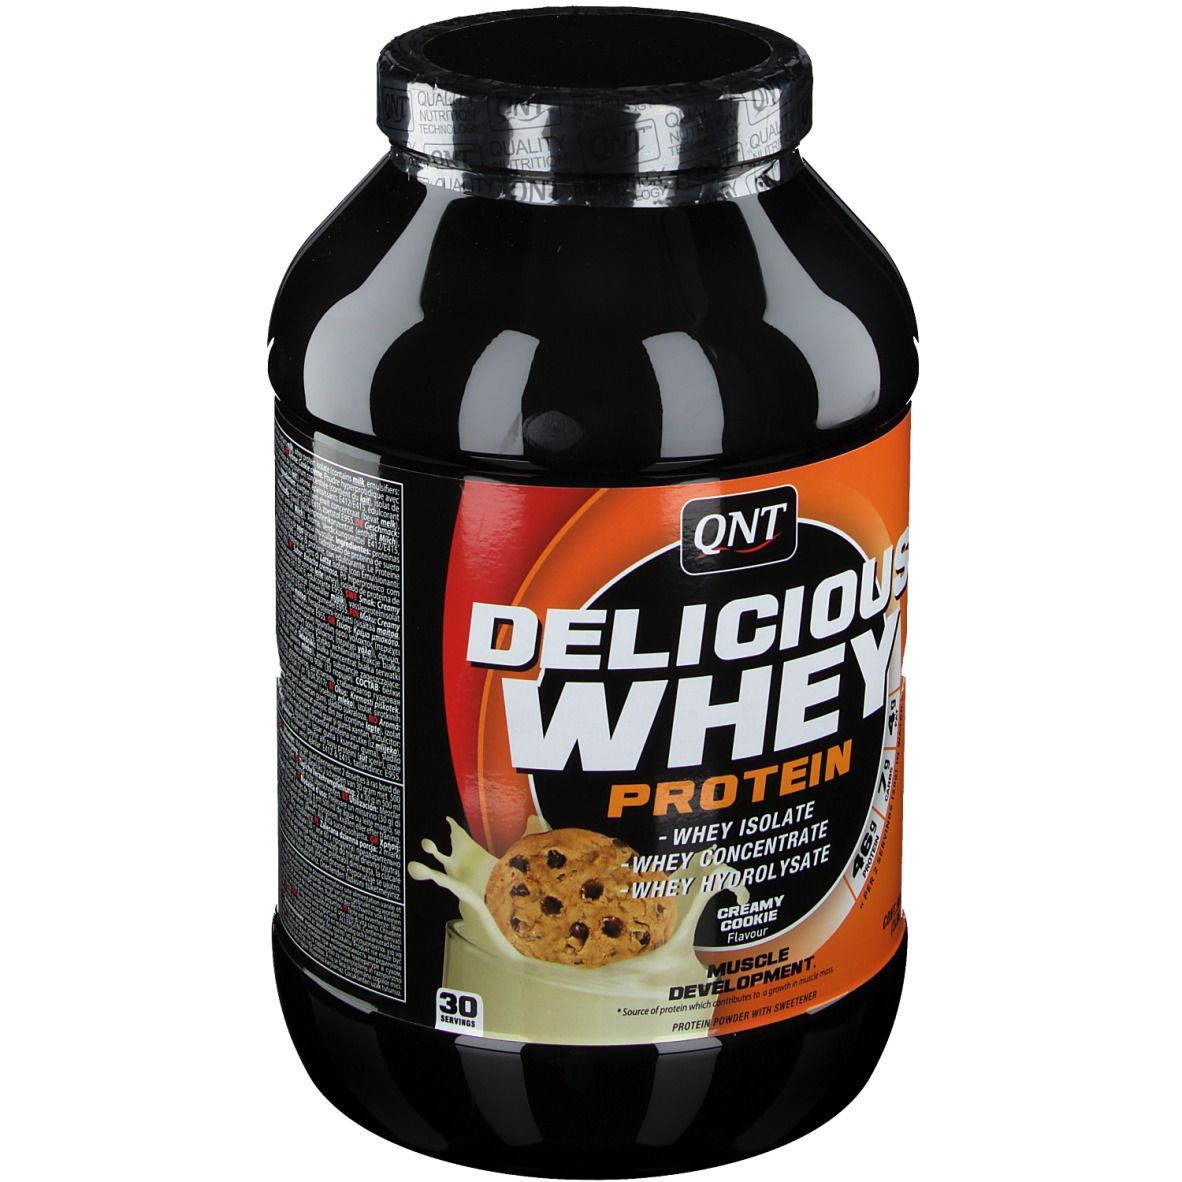 QNT Delicious Whey Protein Cookie Crème